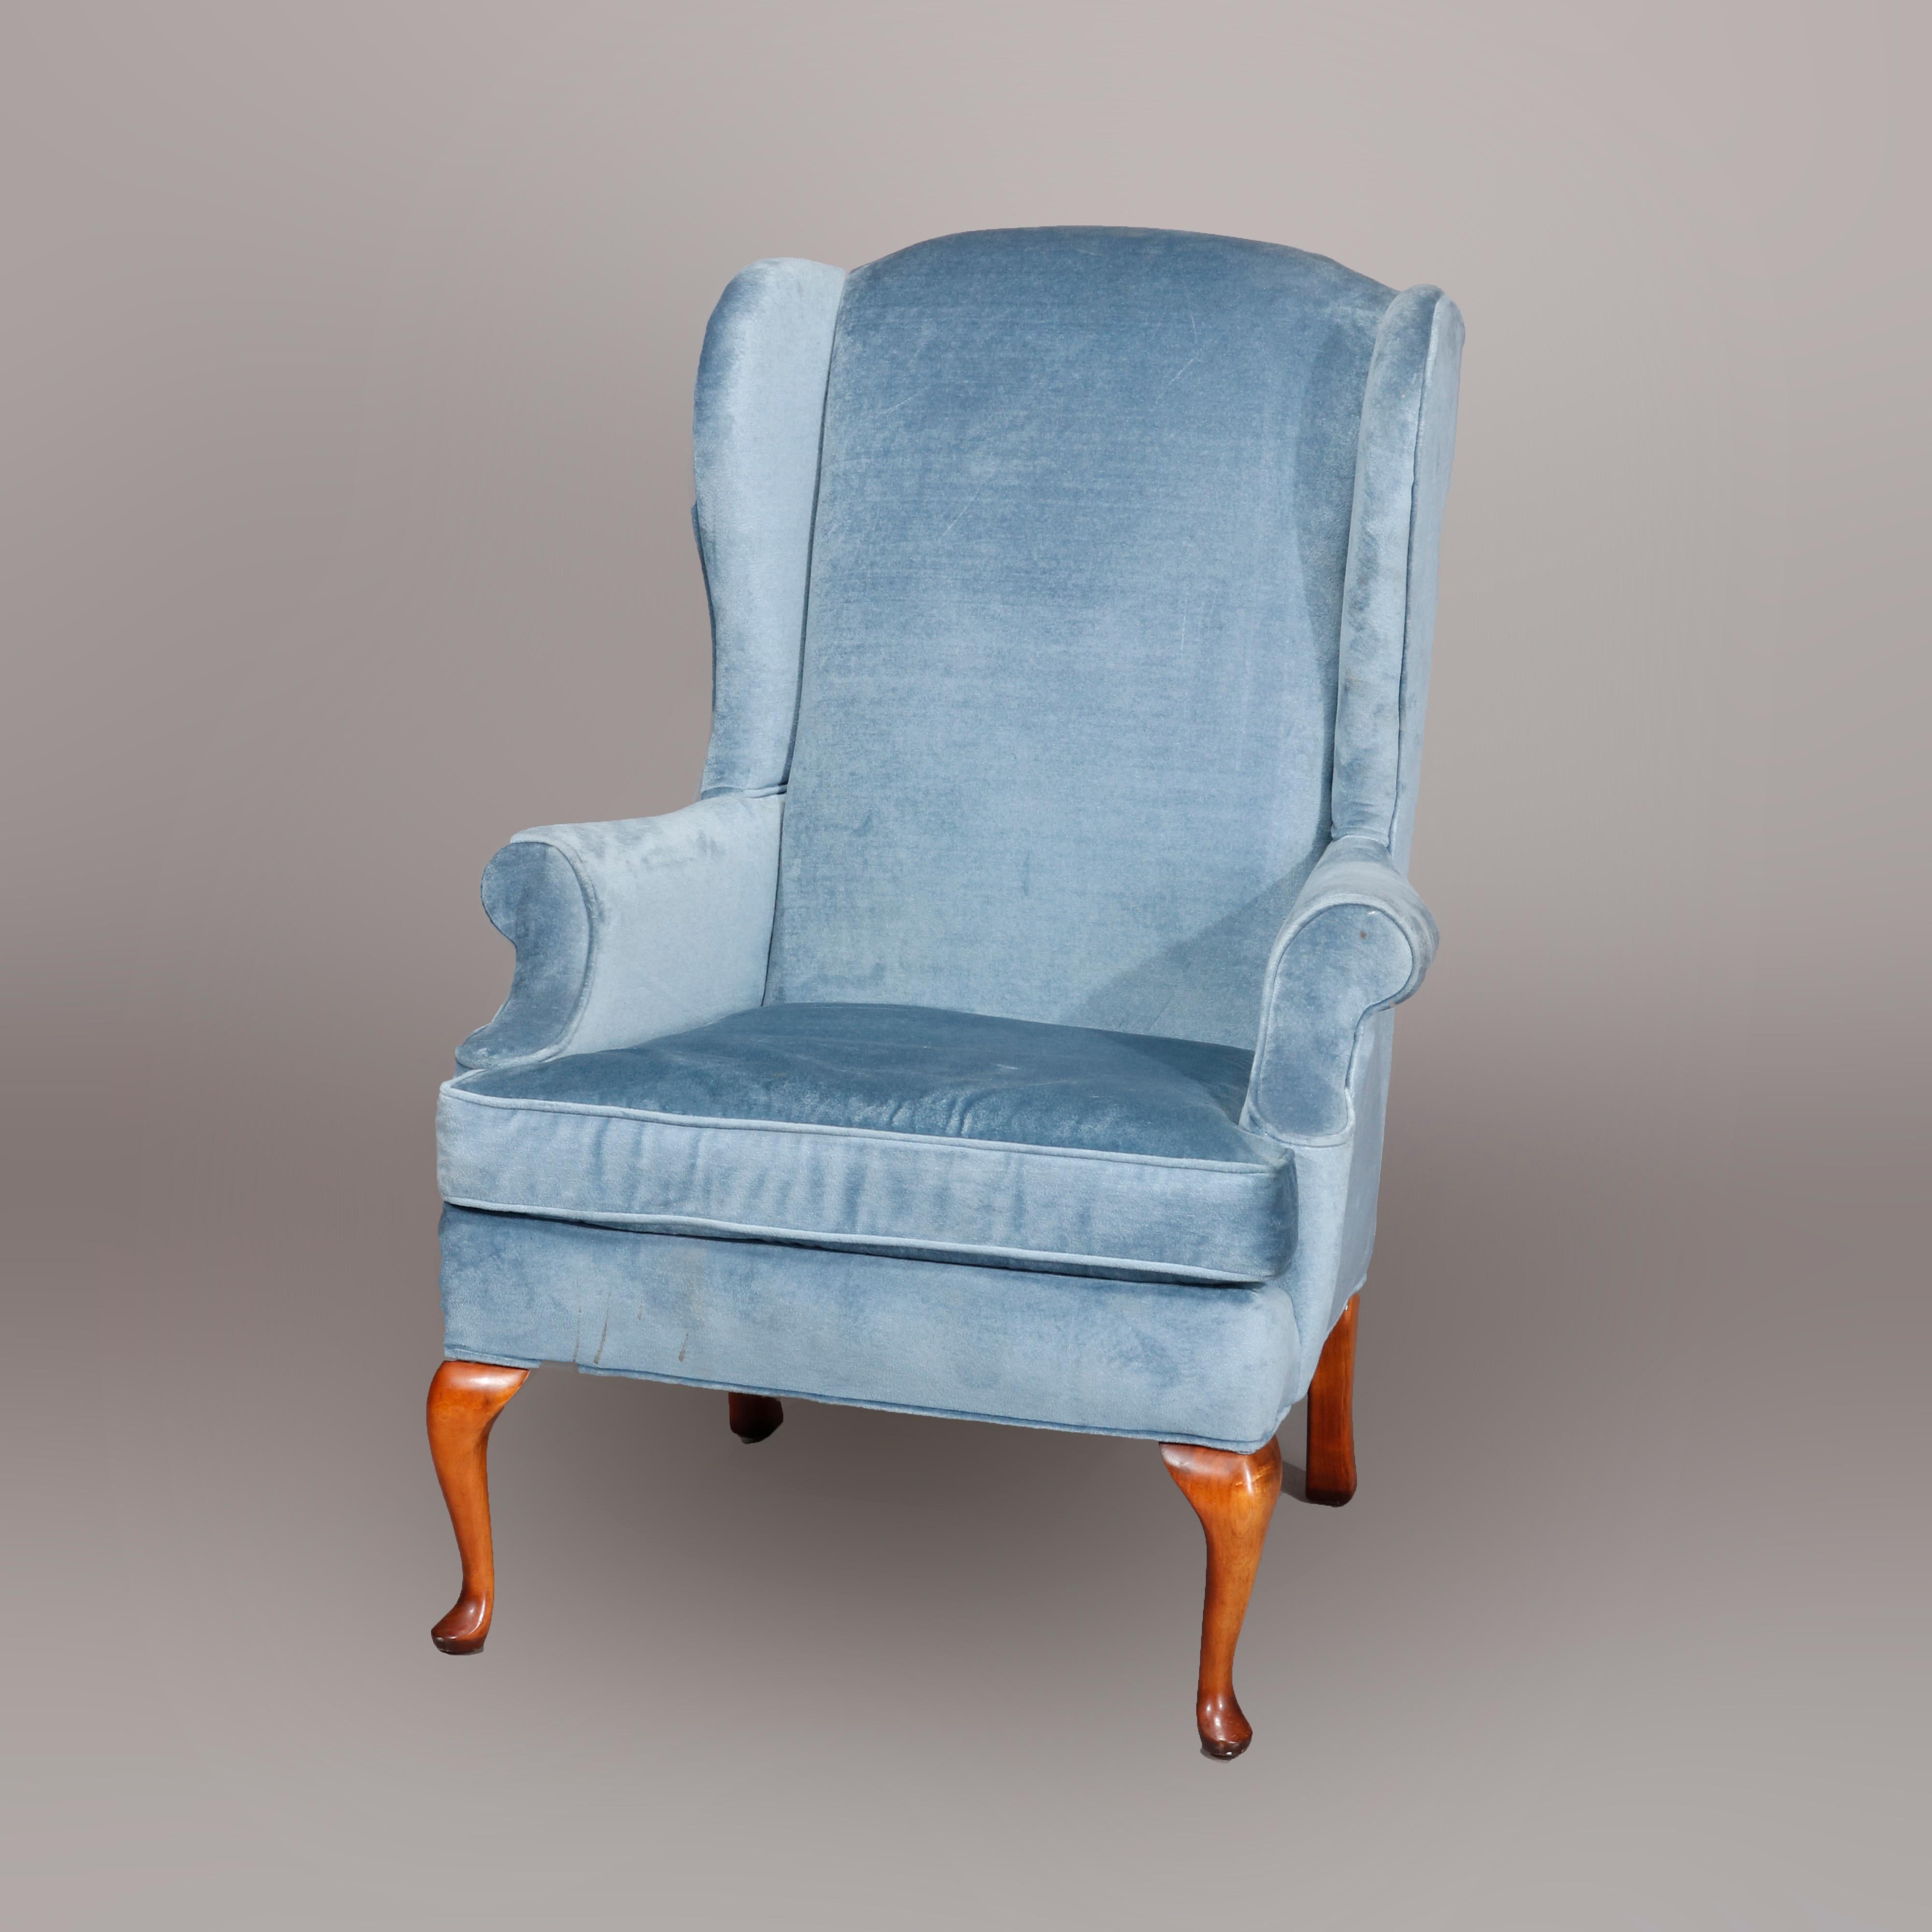 A Queen Anne style wingback chair offers blue upholstered chair by Laine Furniture with scroll arms, raised on cabriole mahogany legs, label as photographed, 20th century.

Measures: 45.5